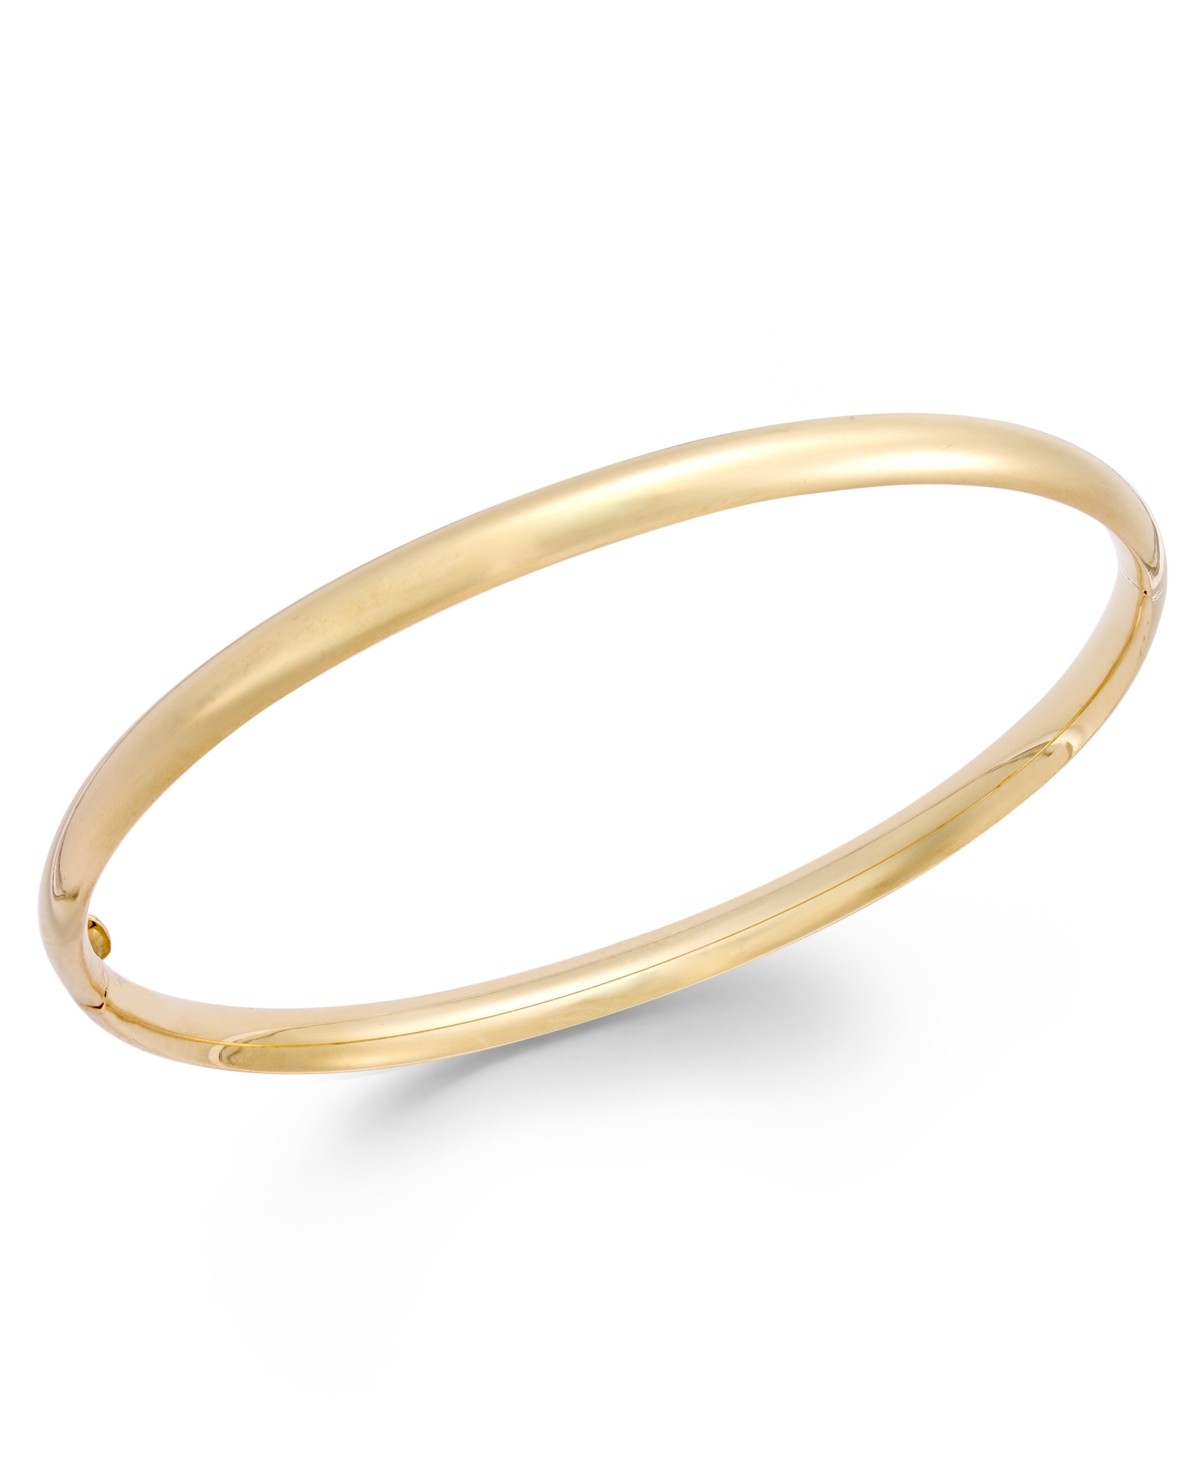 Stackable Bangle Bracelet in 14k Gold - Yellow Gold